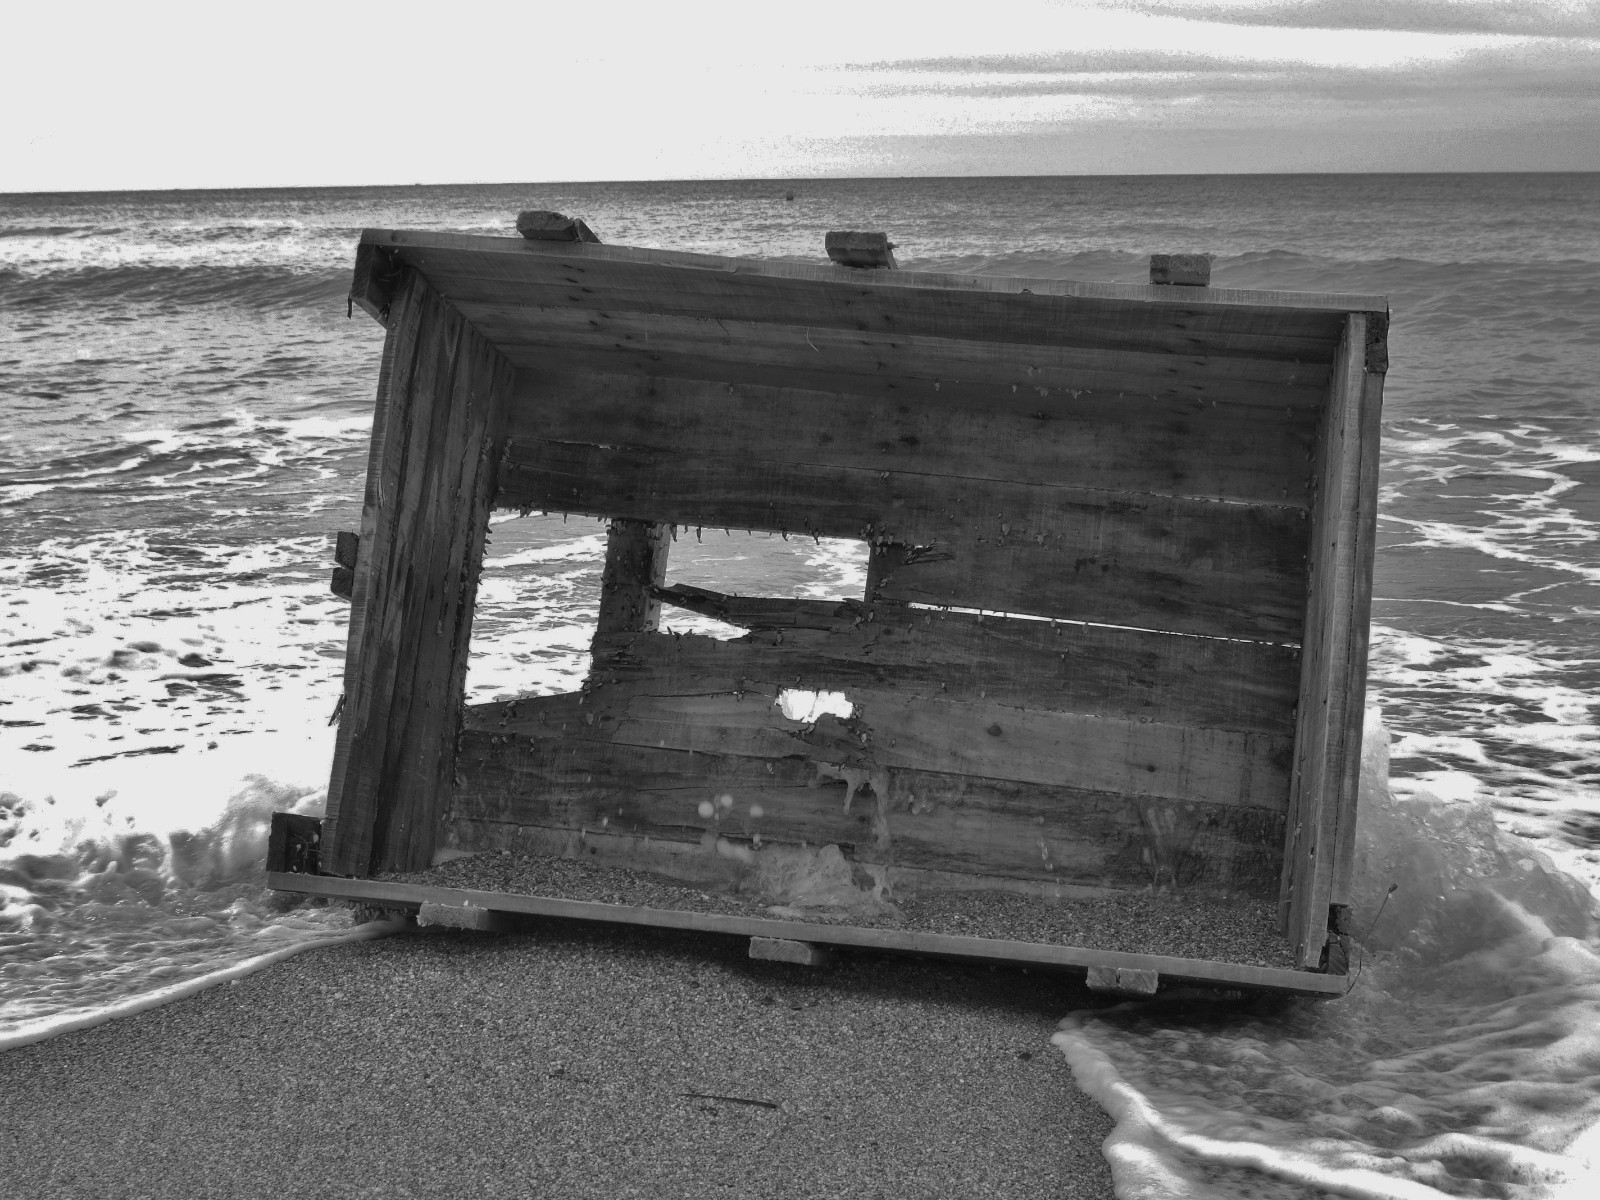 Shipwrecked crate